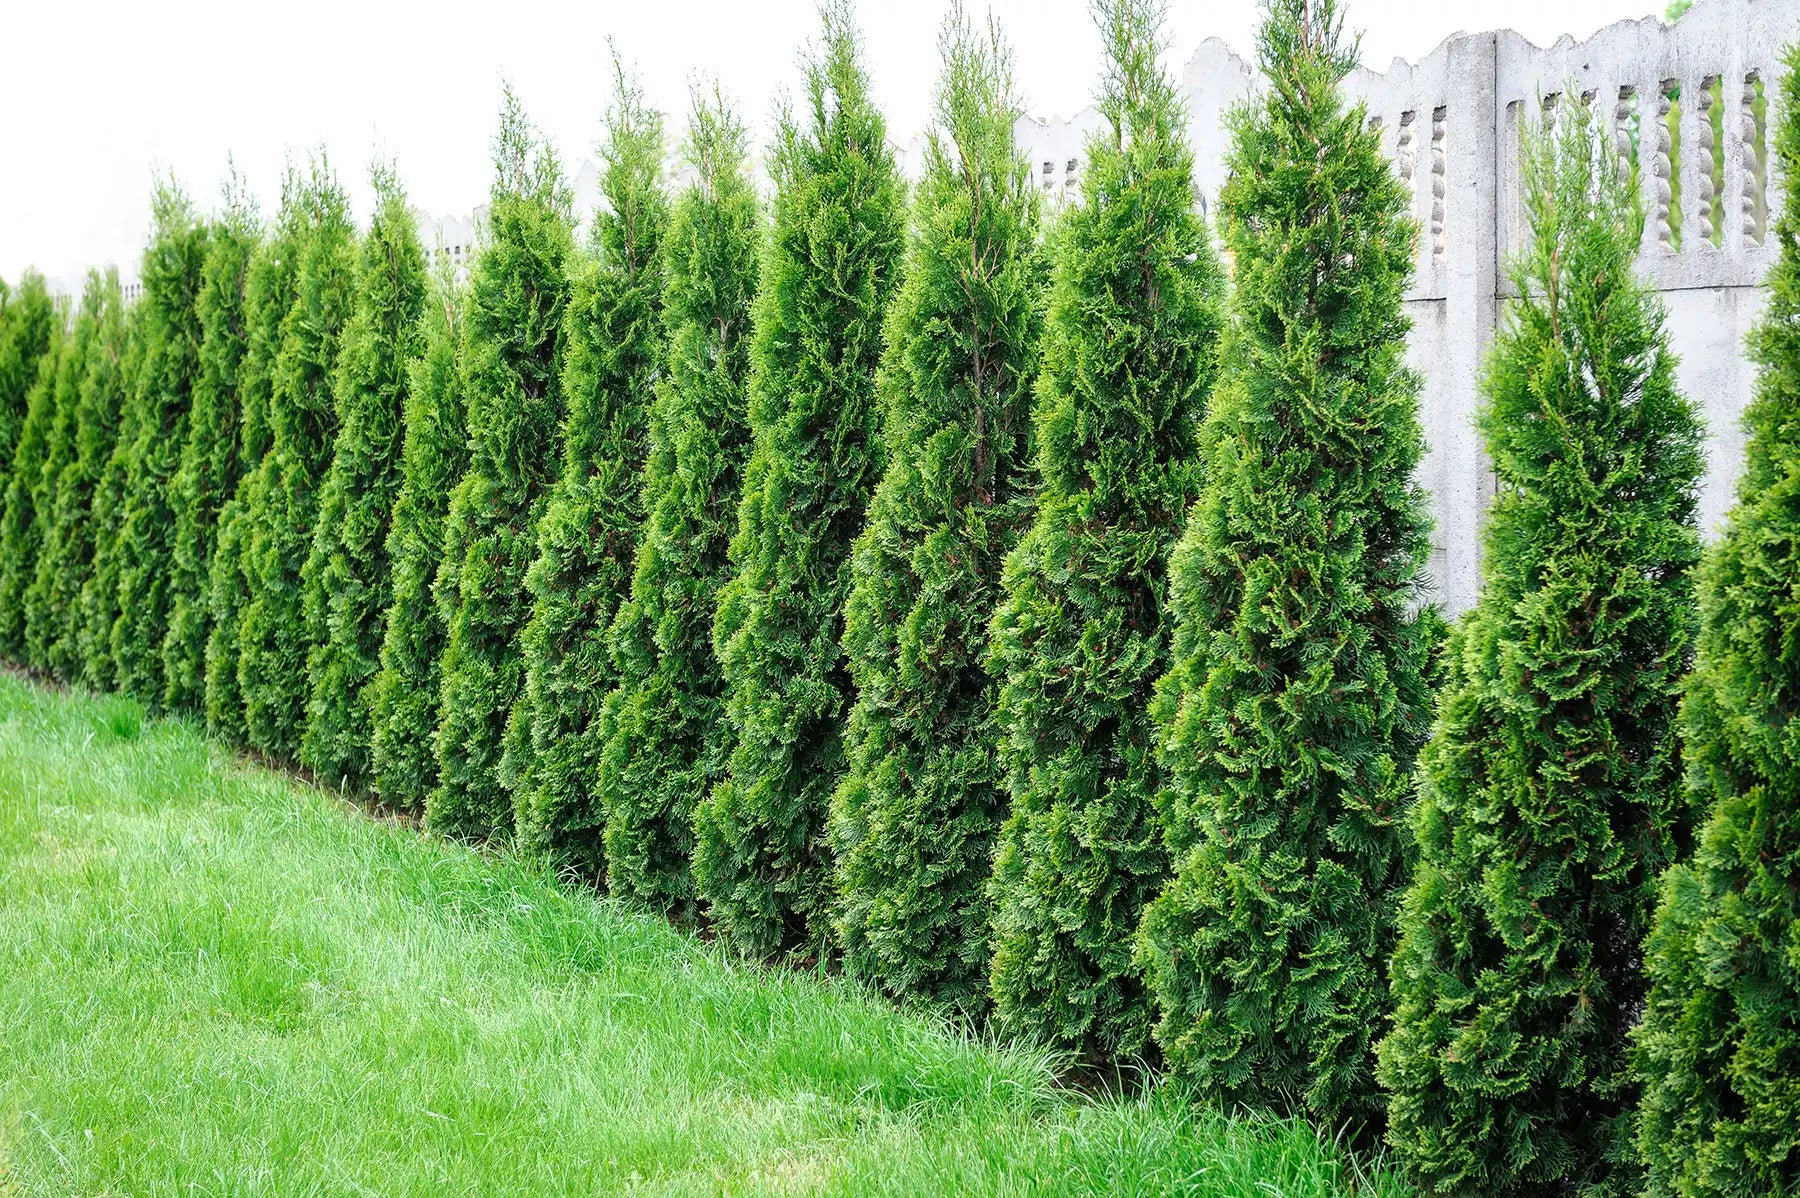 Imposing and soon to be stately, these Green Giant Thuja trees stand like soldiers,  growing rapidly and providing privacy along this residentail property line with a gray decorative fence behind them. 